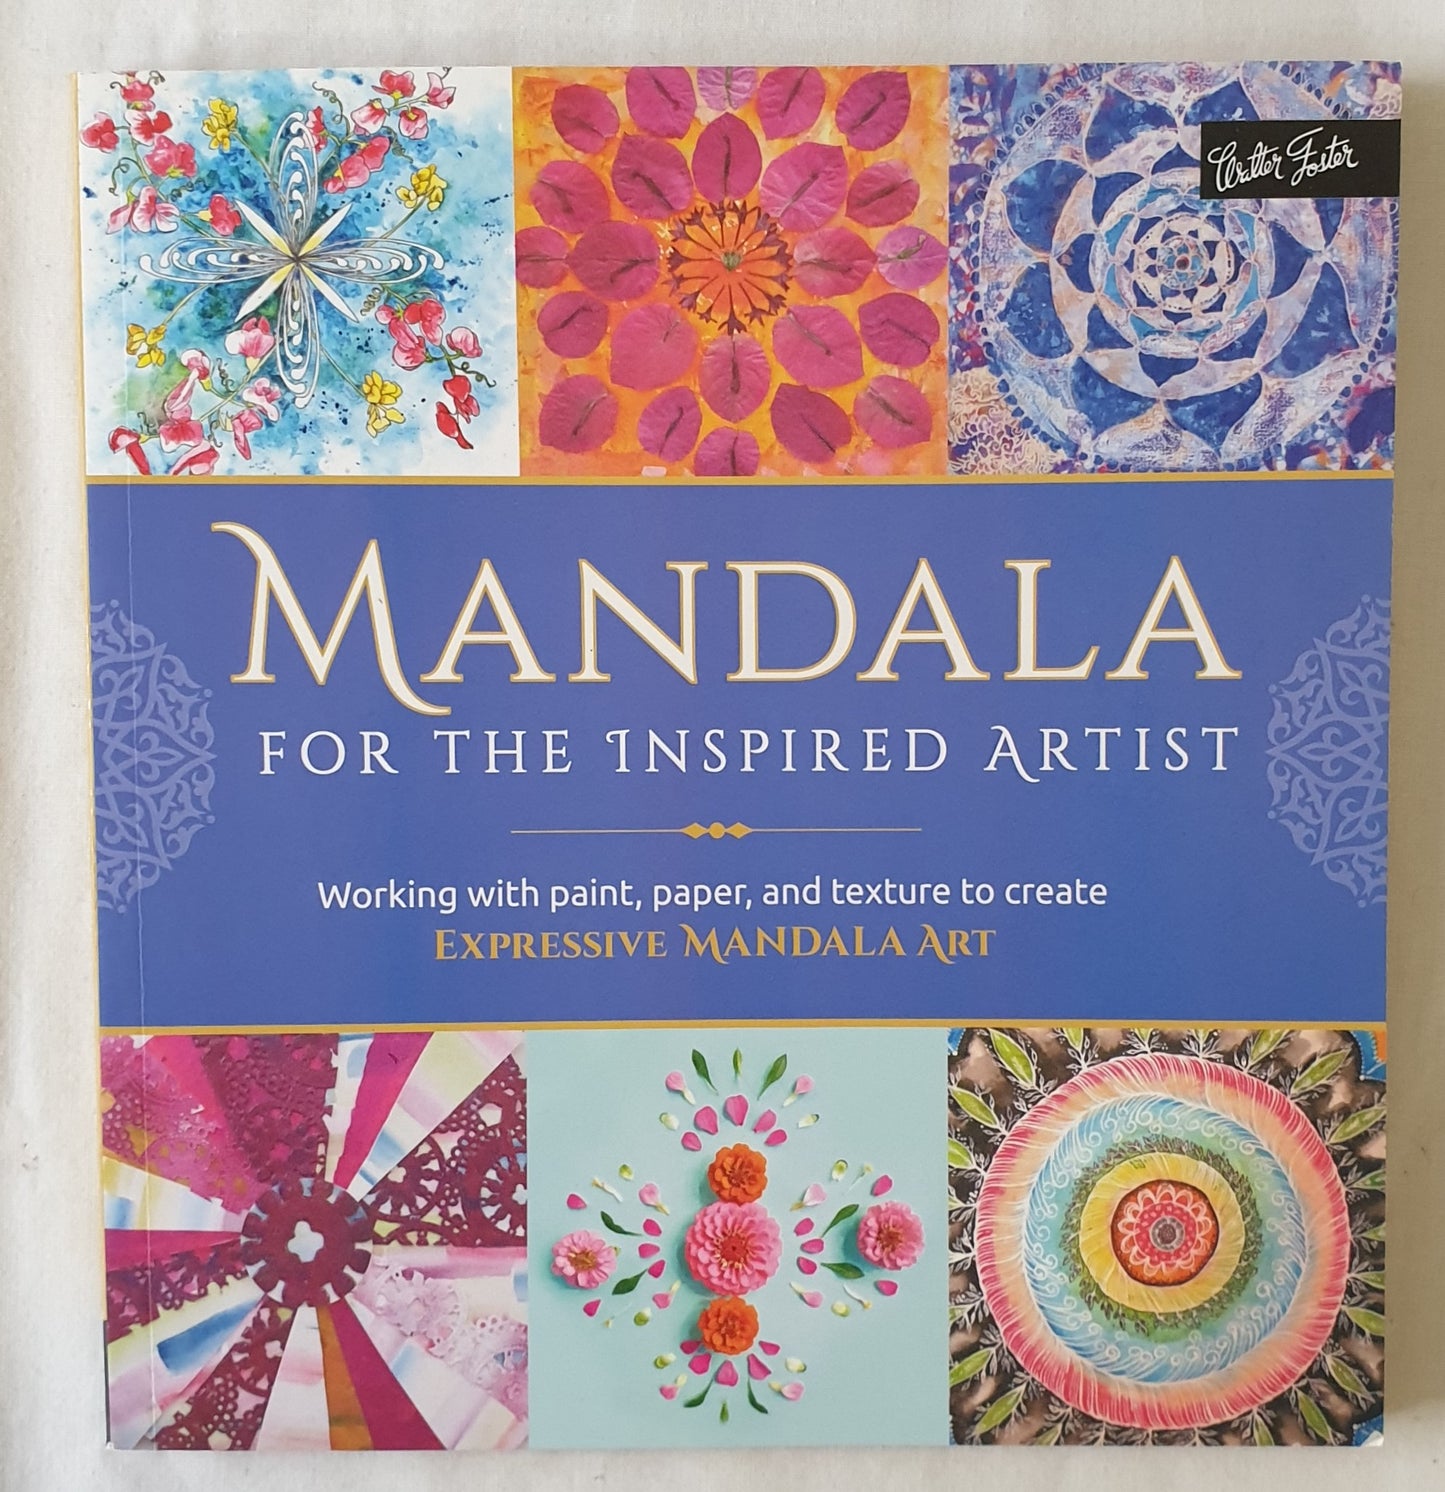 Mandala for the Inspired Artist by Stephanie Carbajal and Andrea Miller